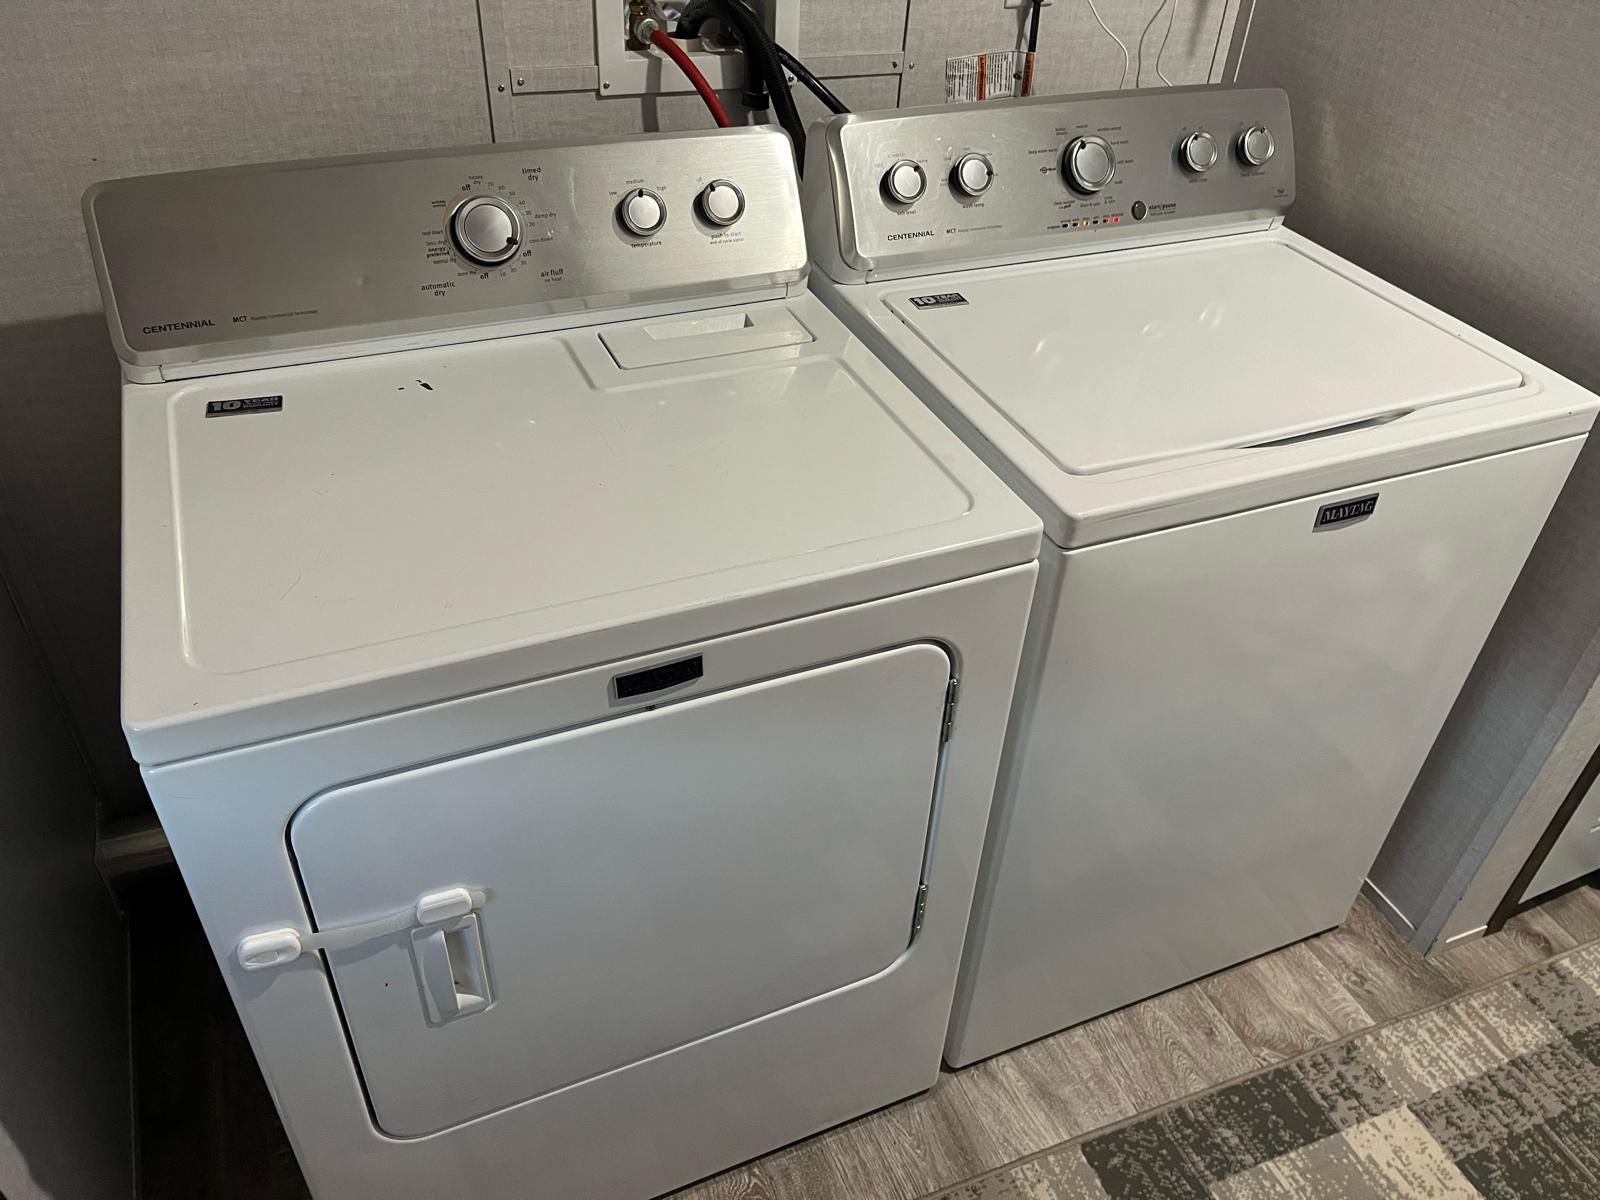 Maytag Washer & Dryer Combo